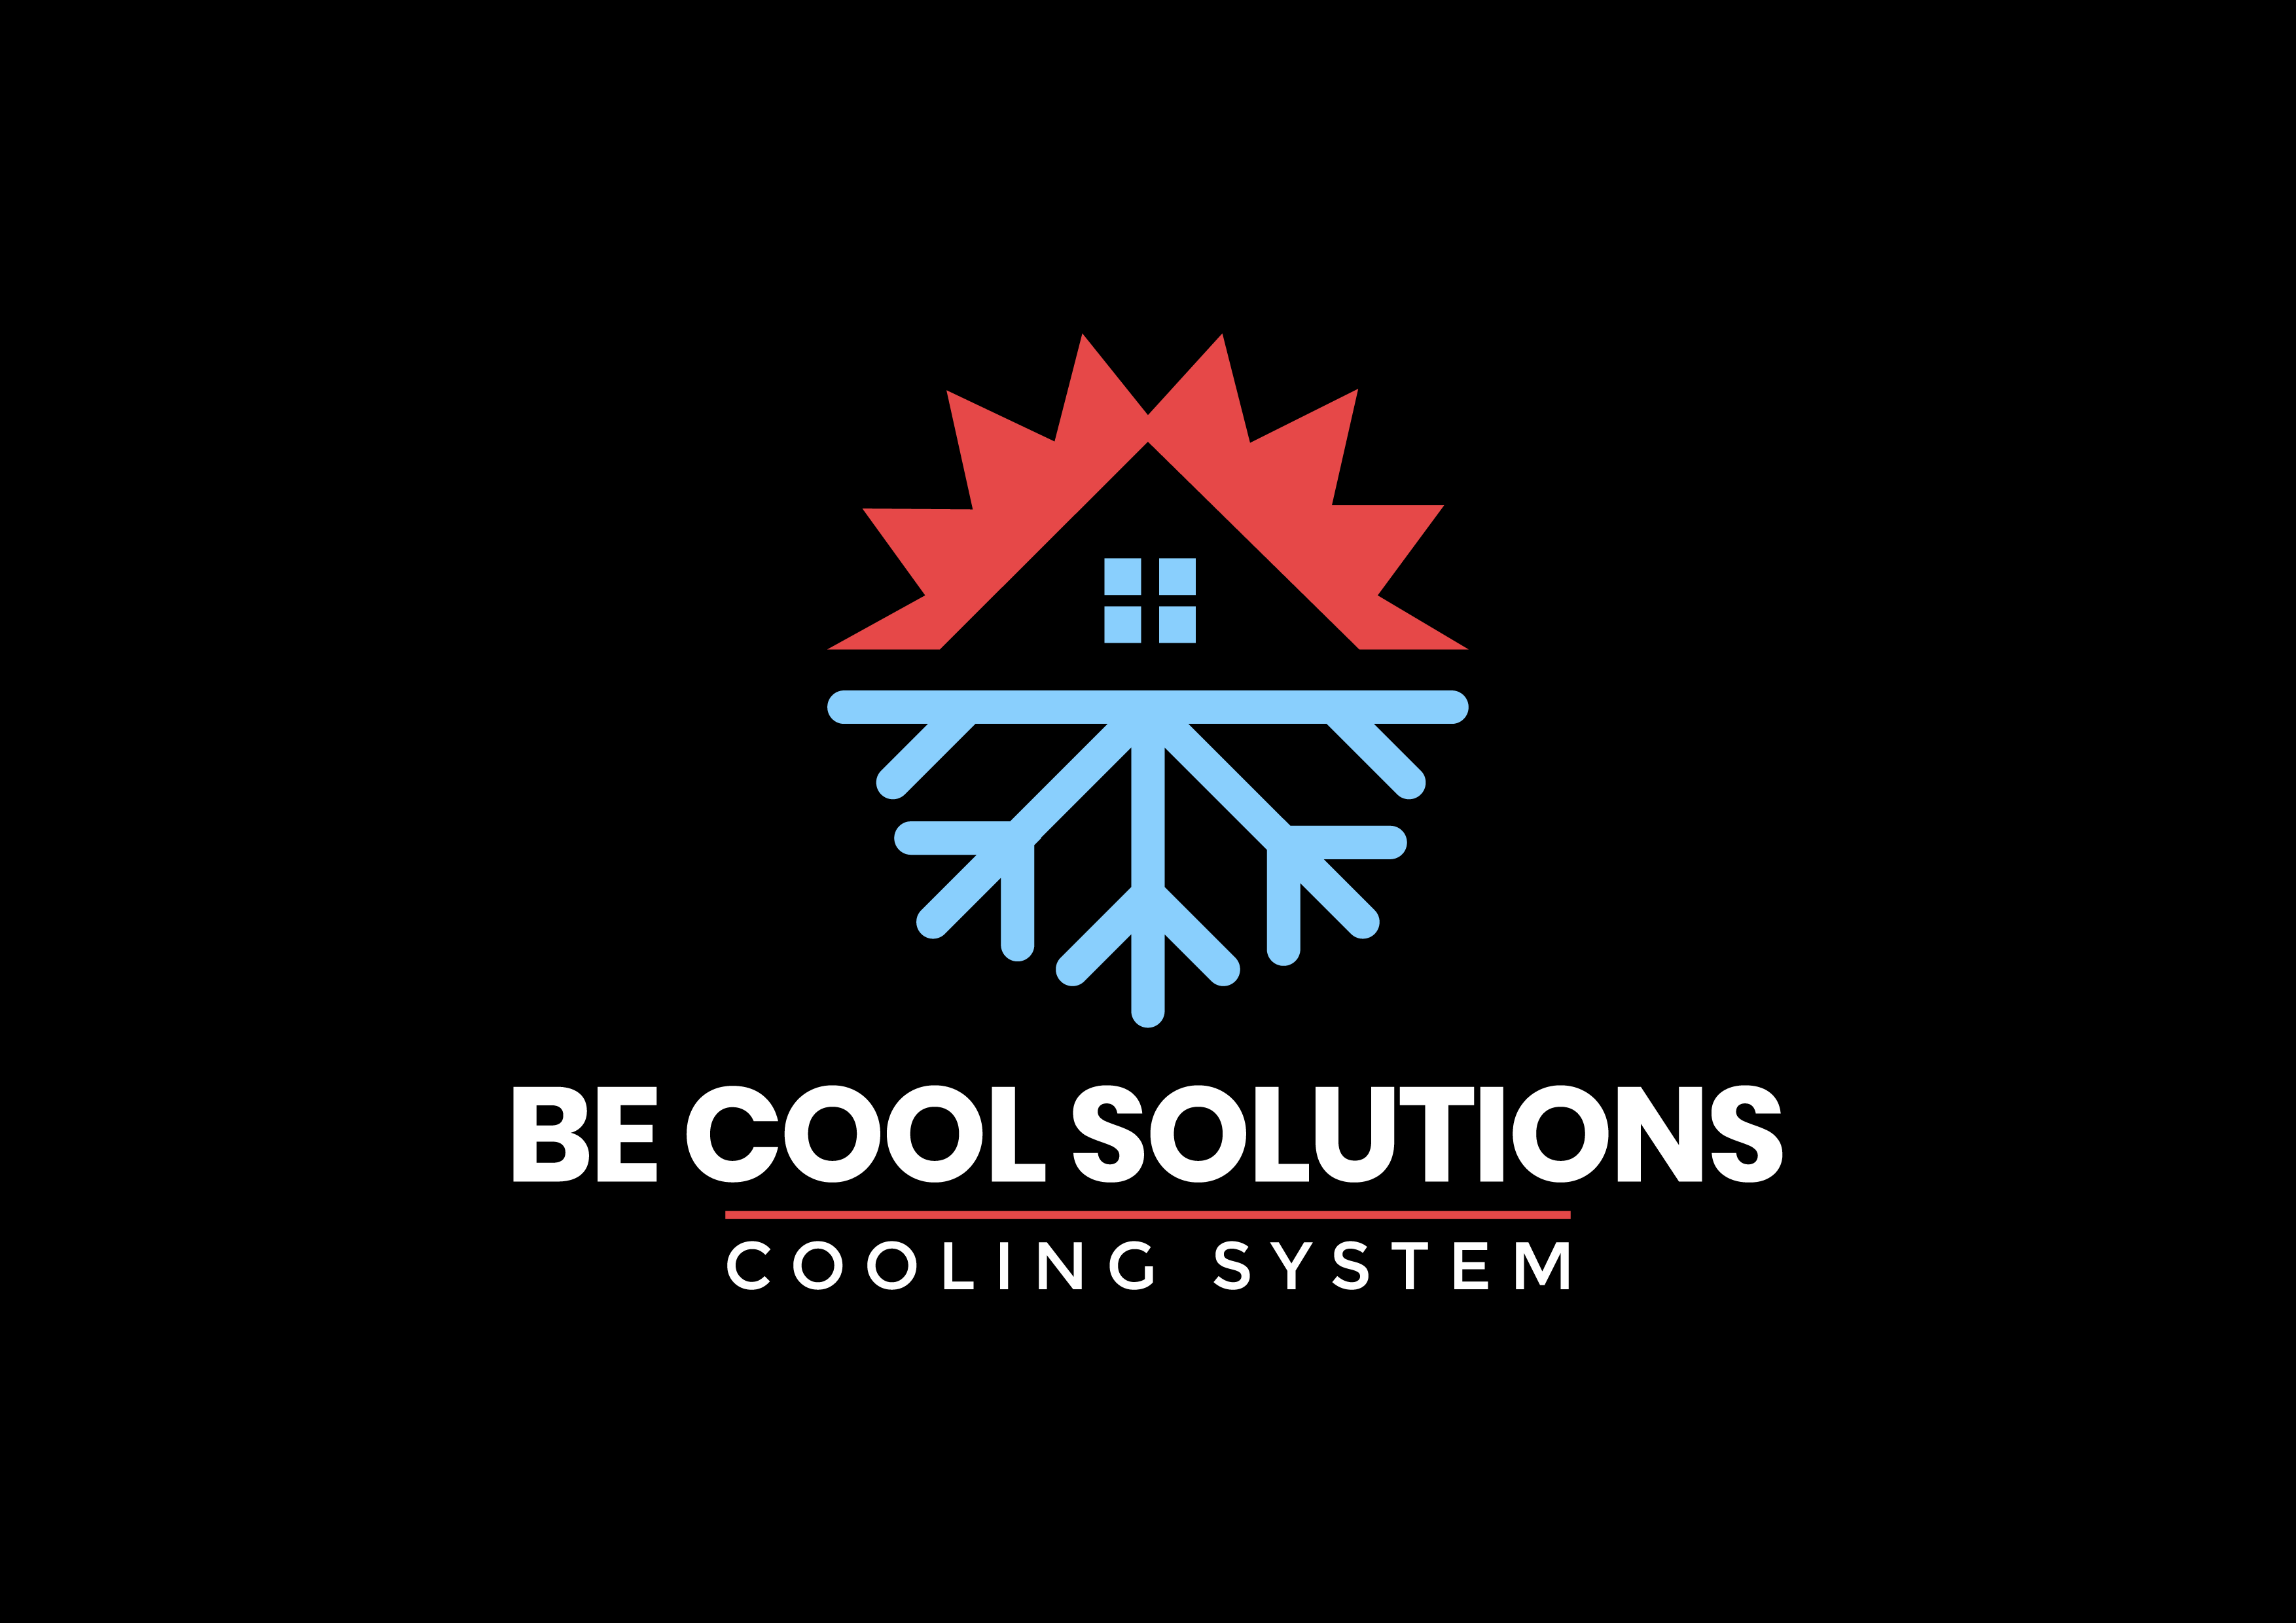 installateurs van airconditioning Oudergem Be Cool Solutions